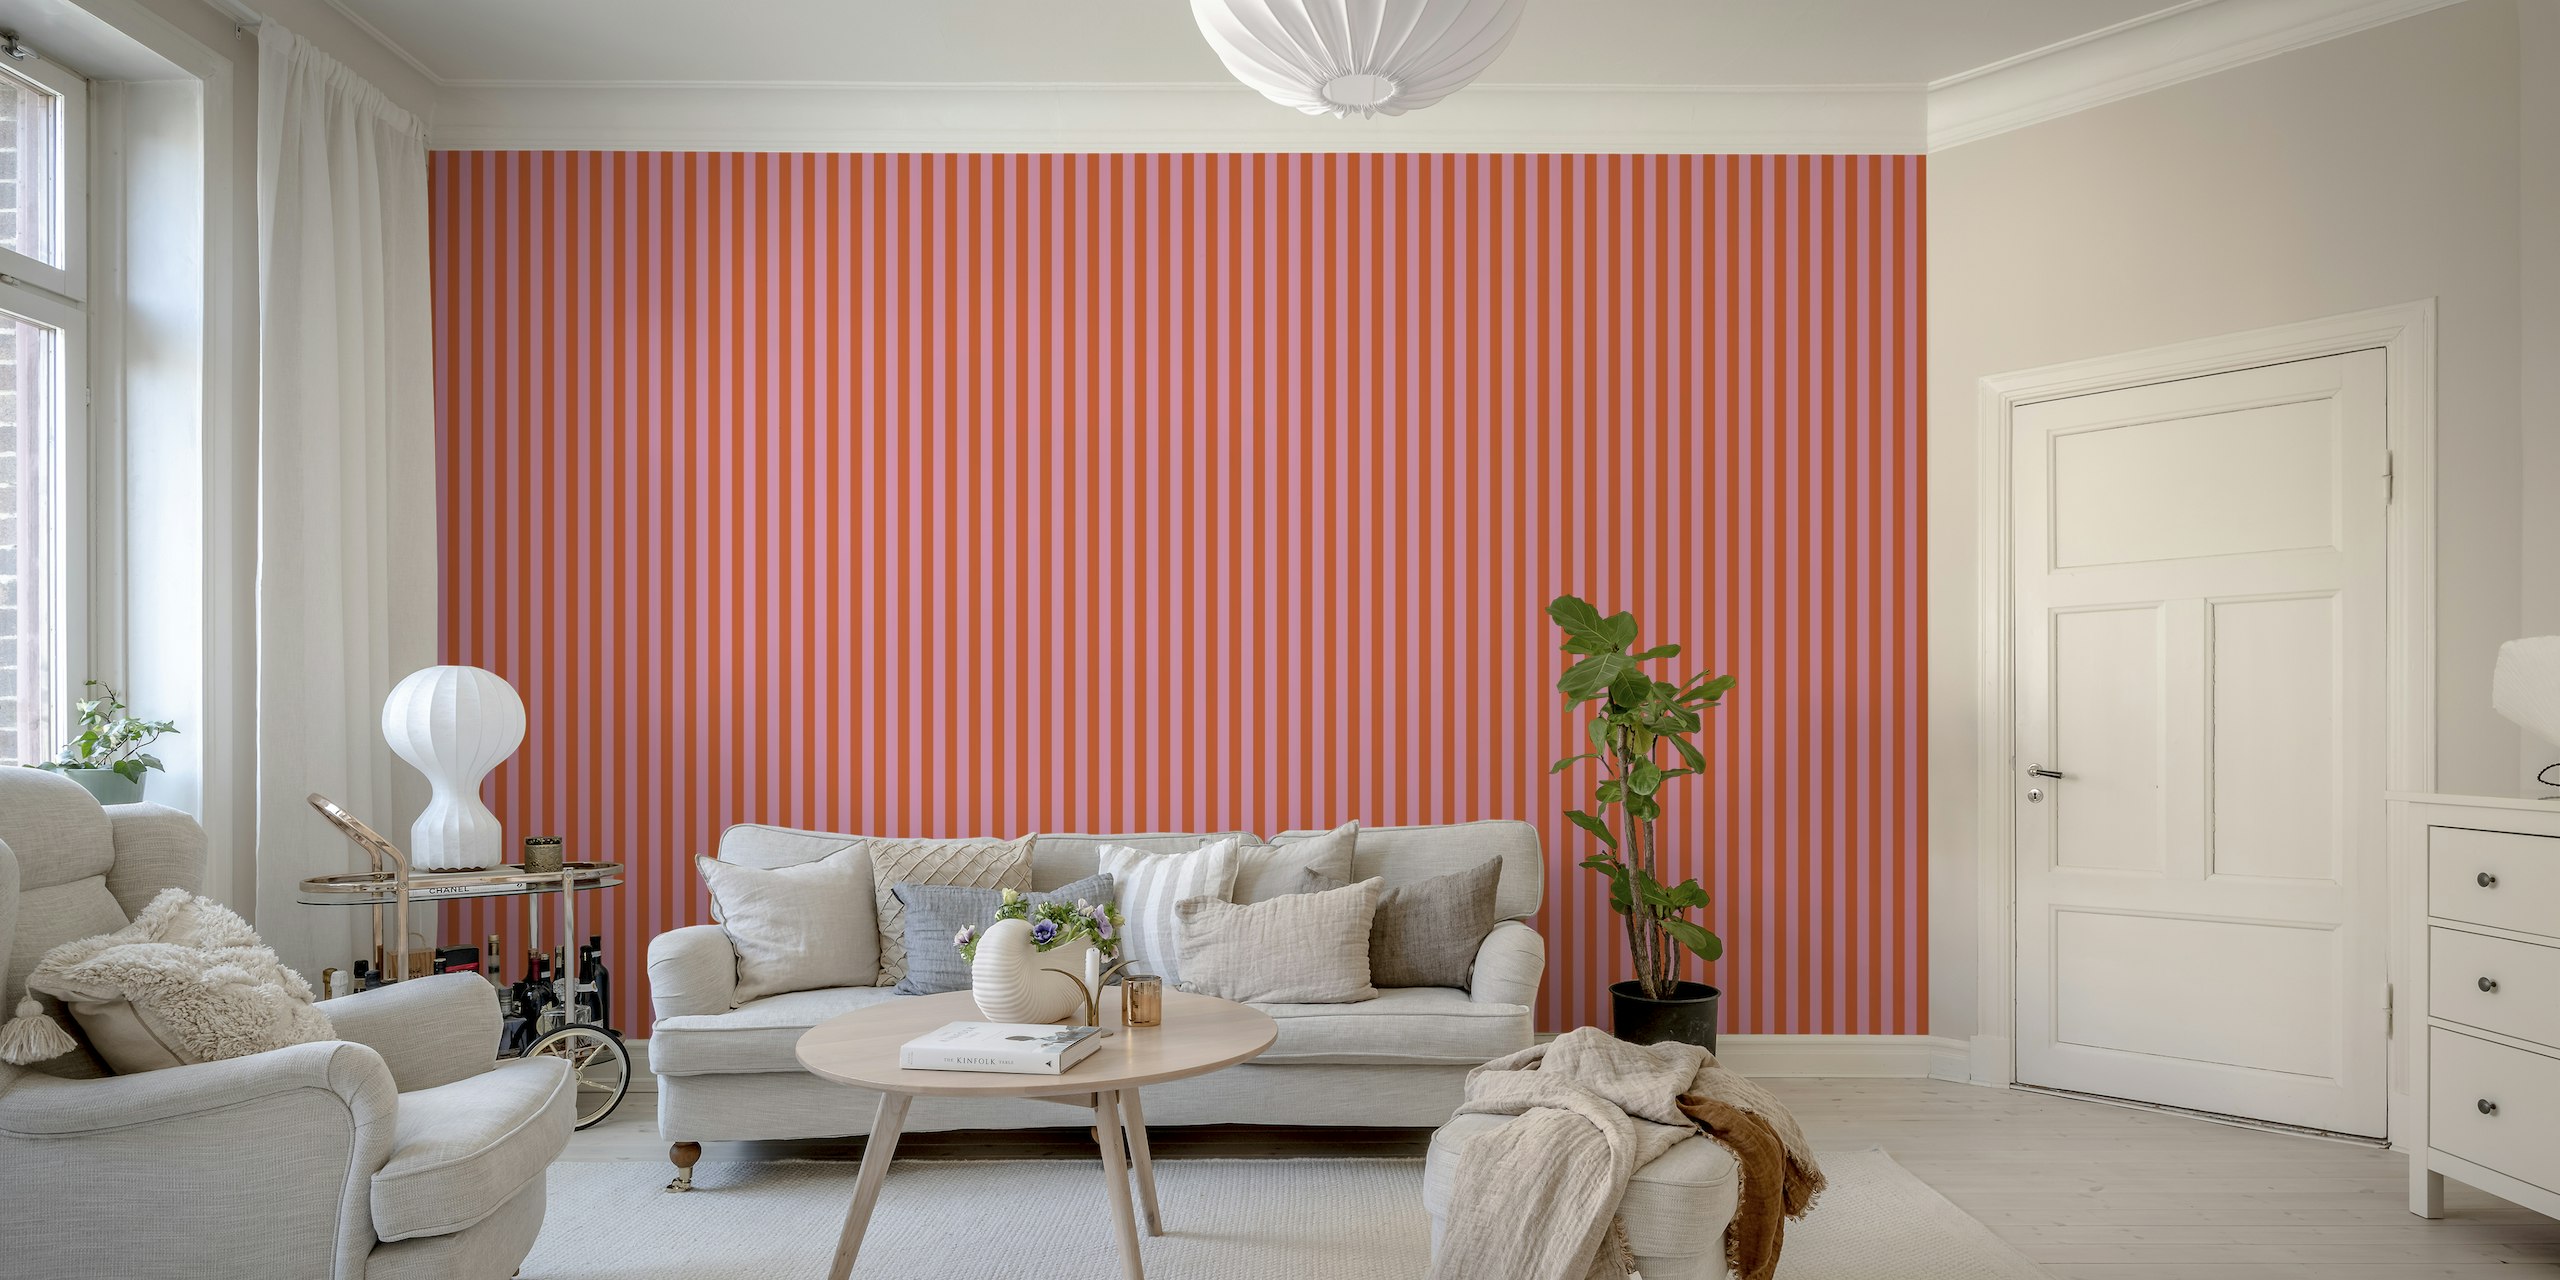 Pink and red awning stripe ταπετσαρία